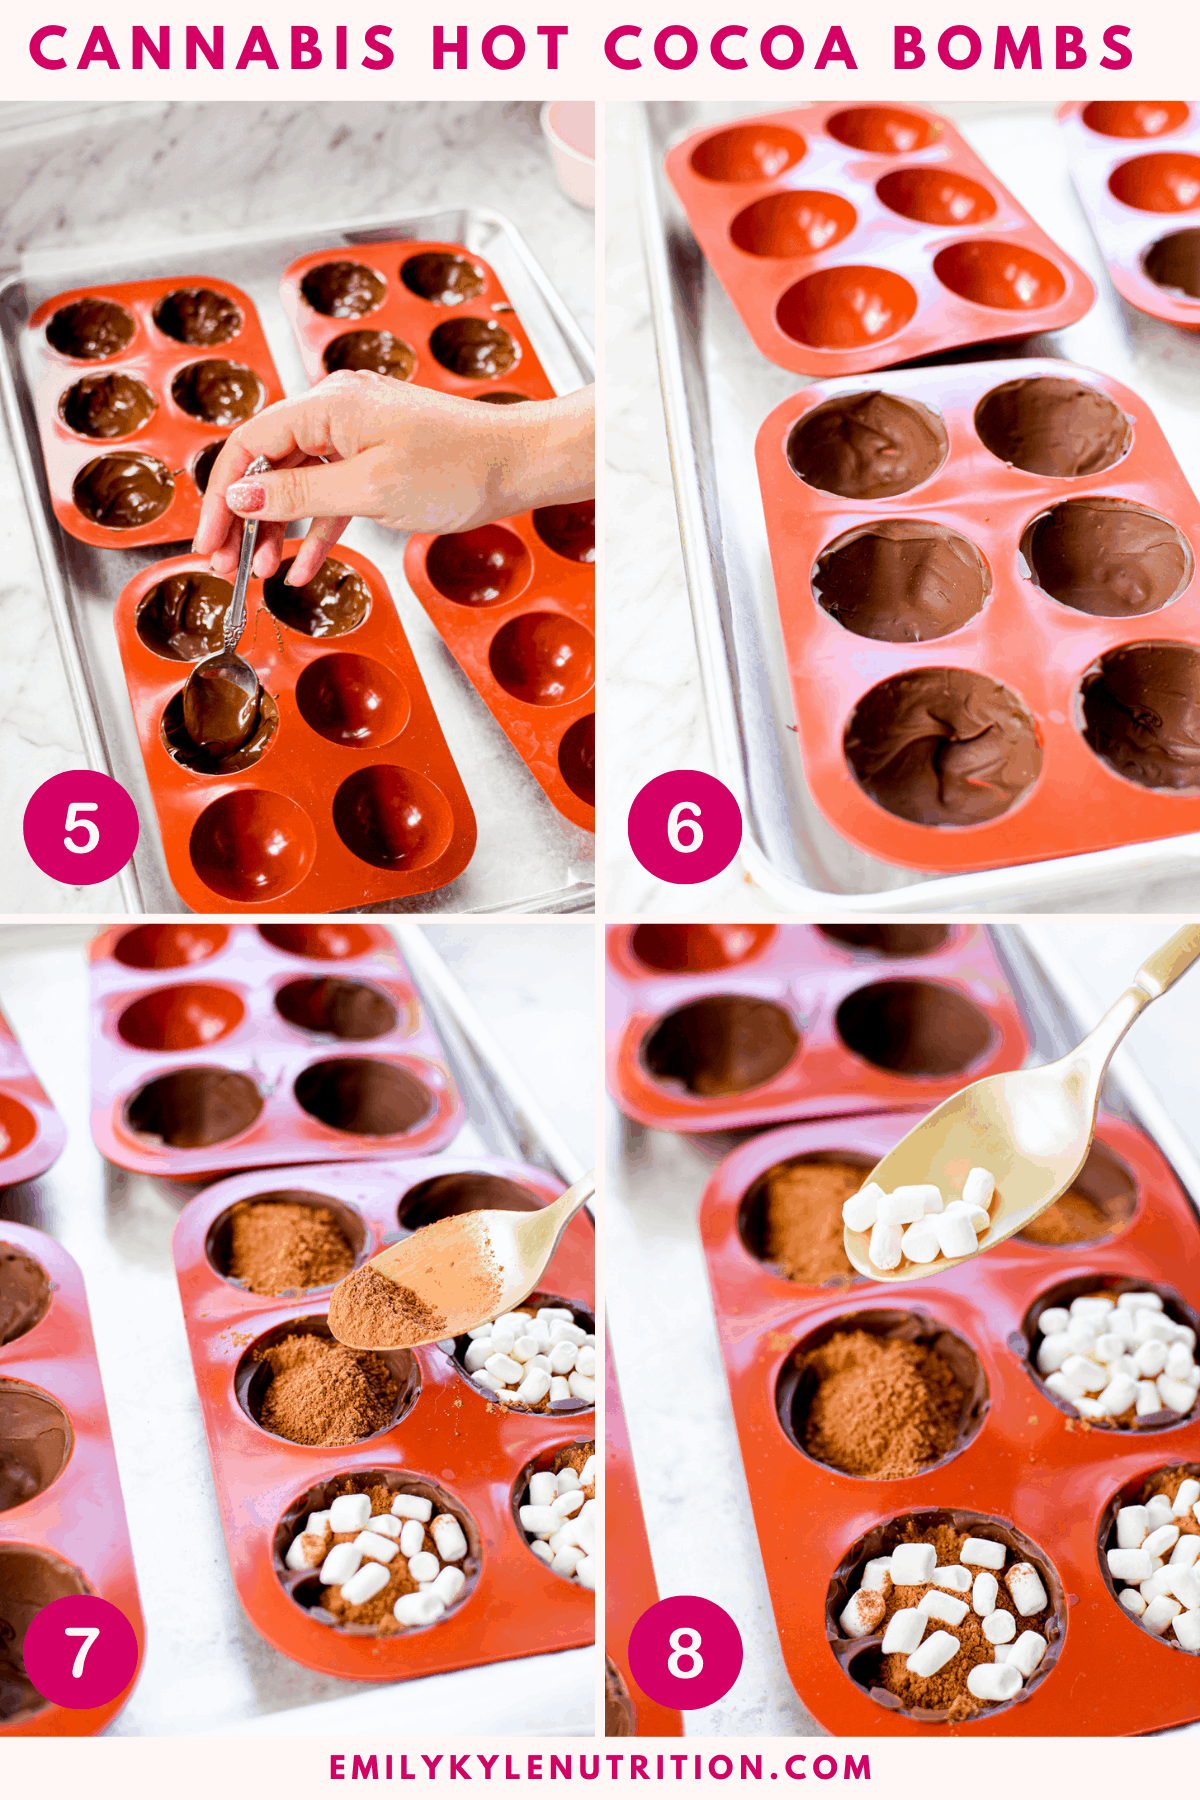 A 4-step collage showing how to make steps 5-8 in making hot cocoa bombs including putting chocolate in the molds, what they look like after freezing, adding hot cocoa to the chocolate cups, following by marshmallows